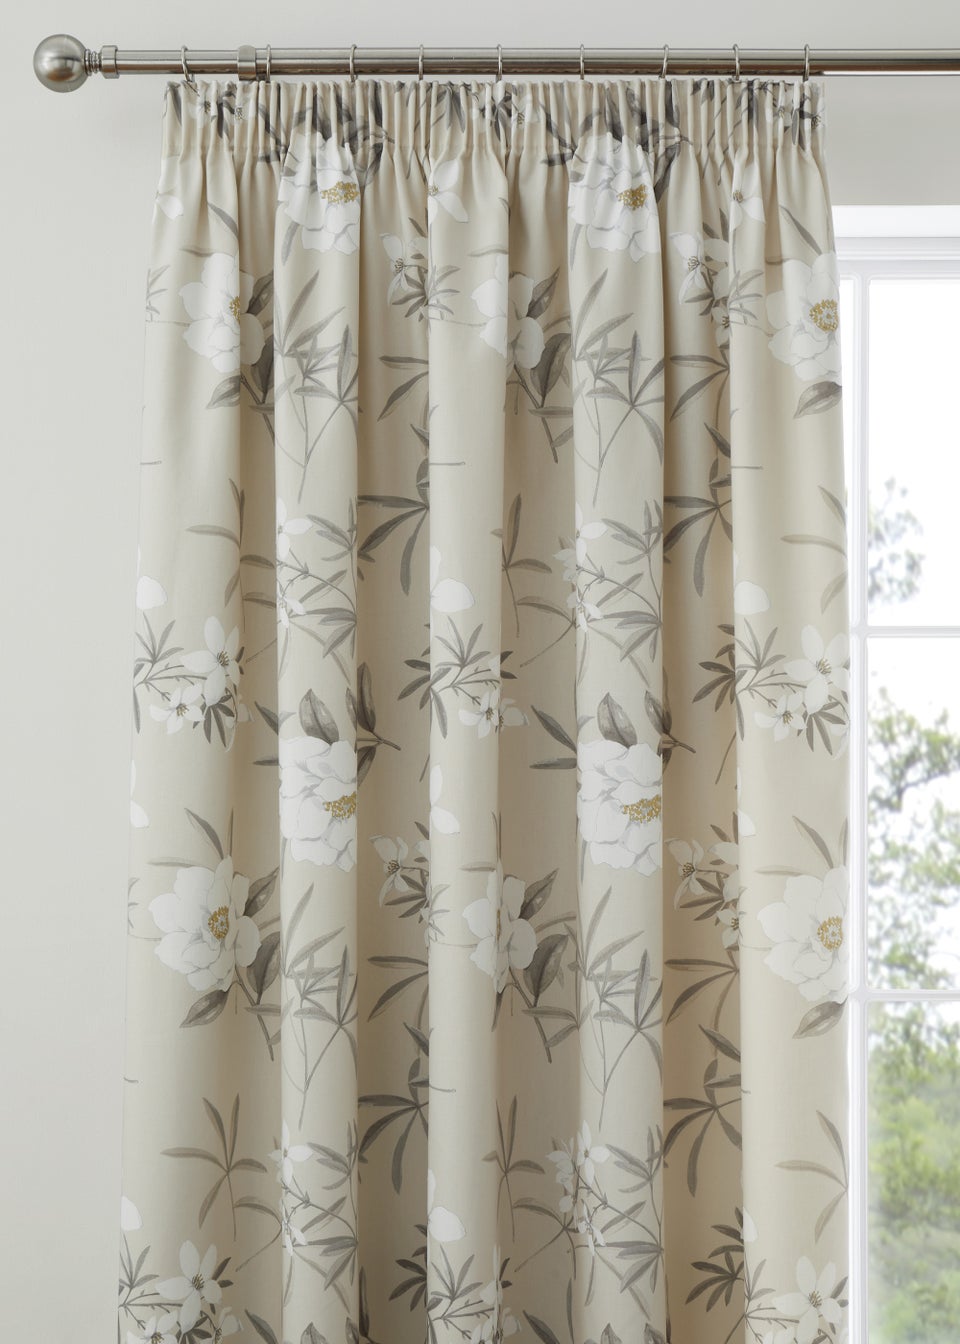 Dreams & Drapes Eve Pencil Pleat Curtains With Tie-Backs